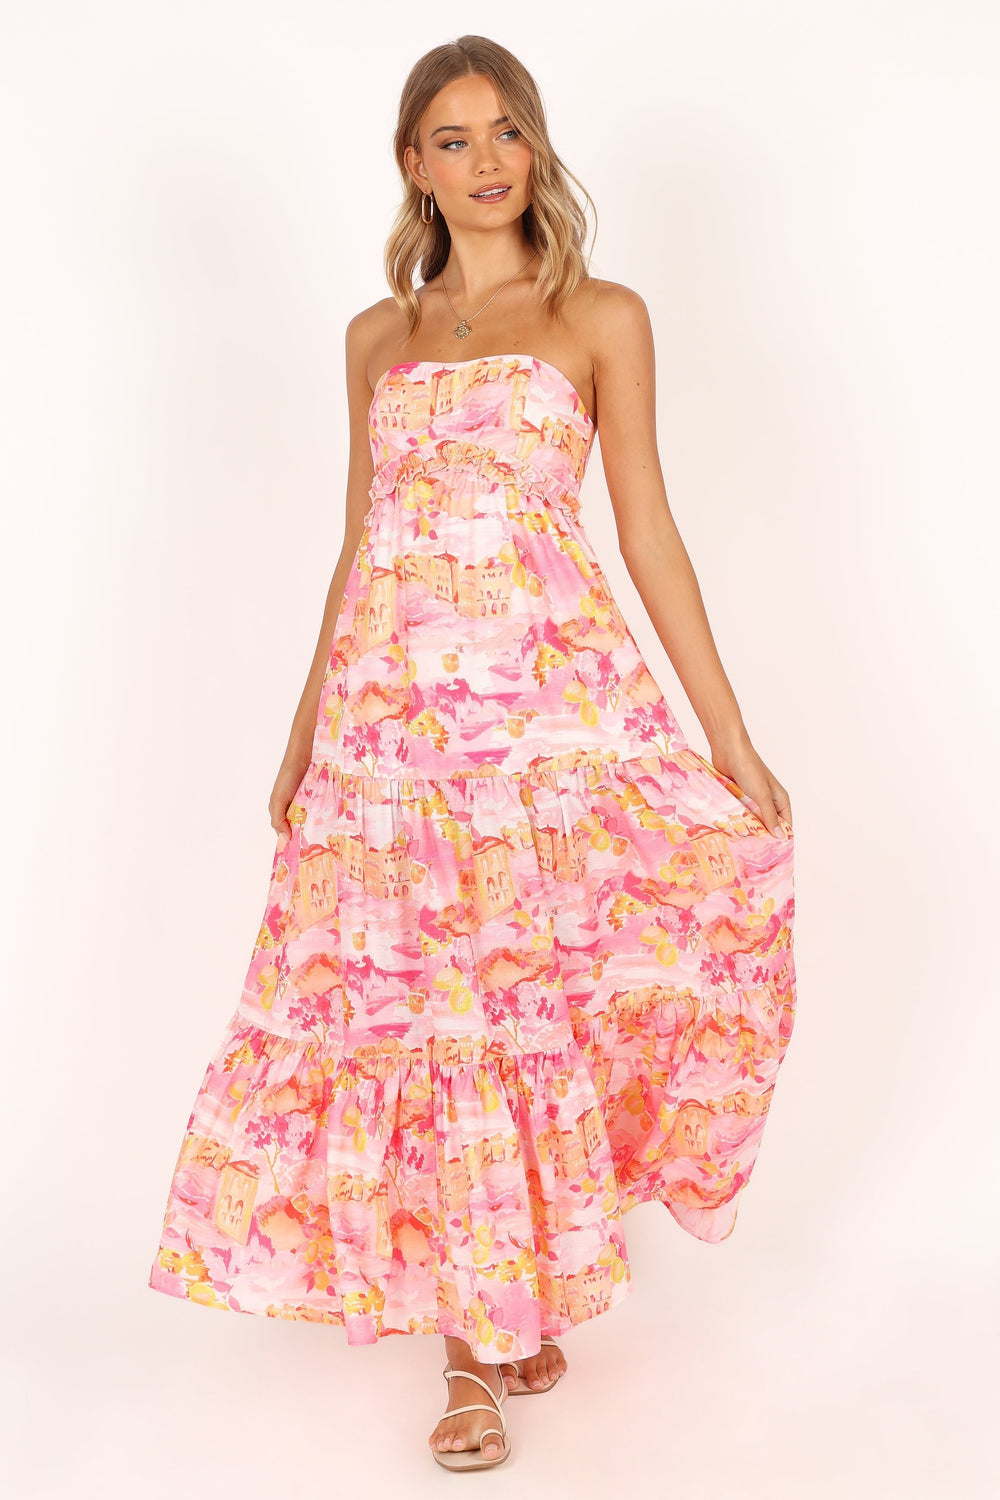 Petal and Pup USA DRESSES Arianna Strapless Dress - Pink Scenic